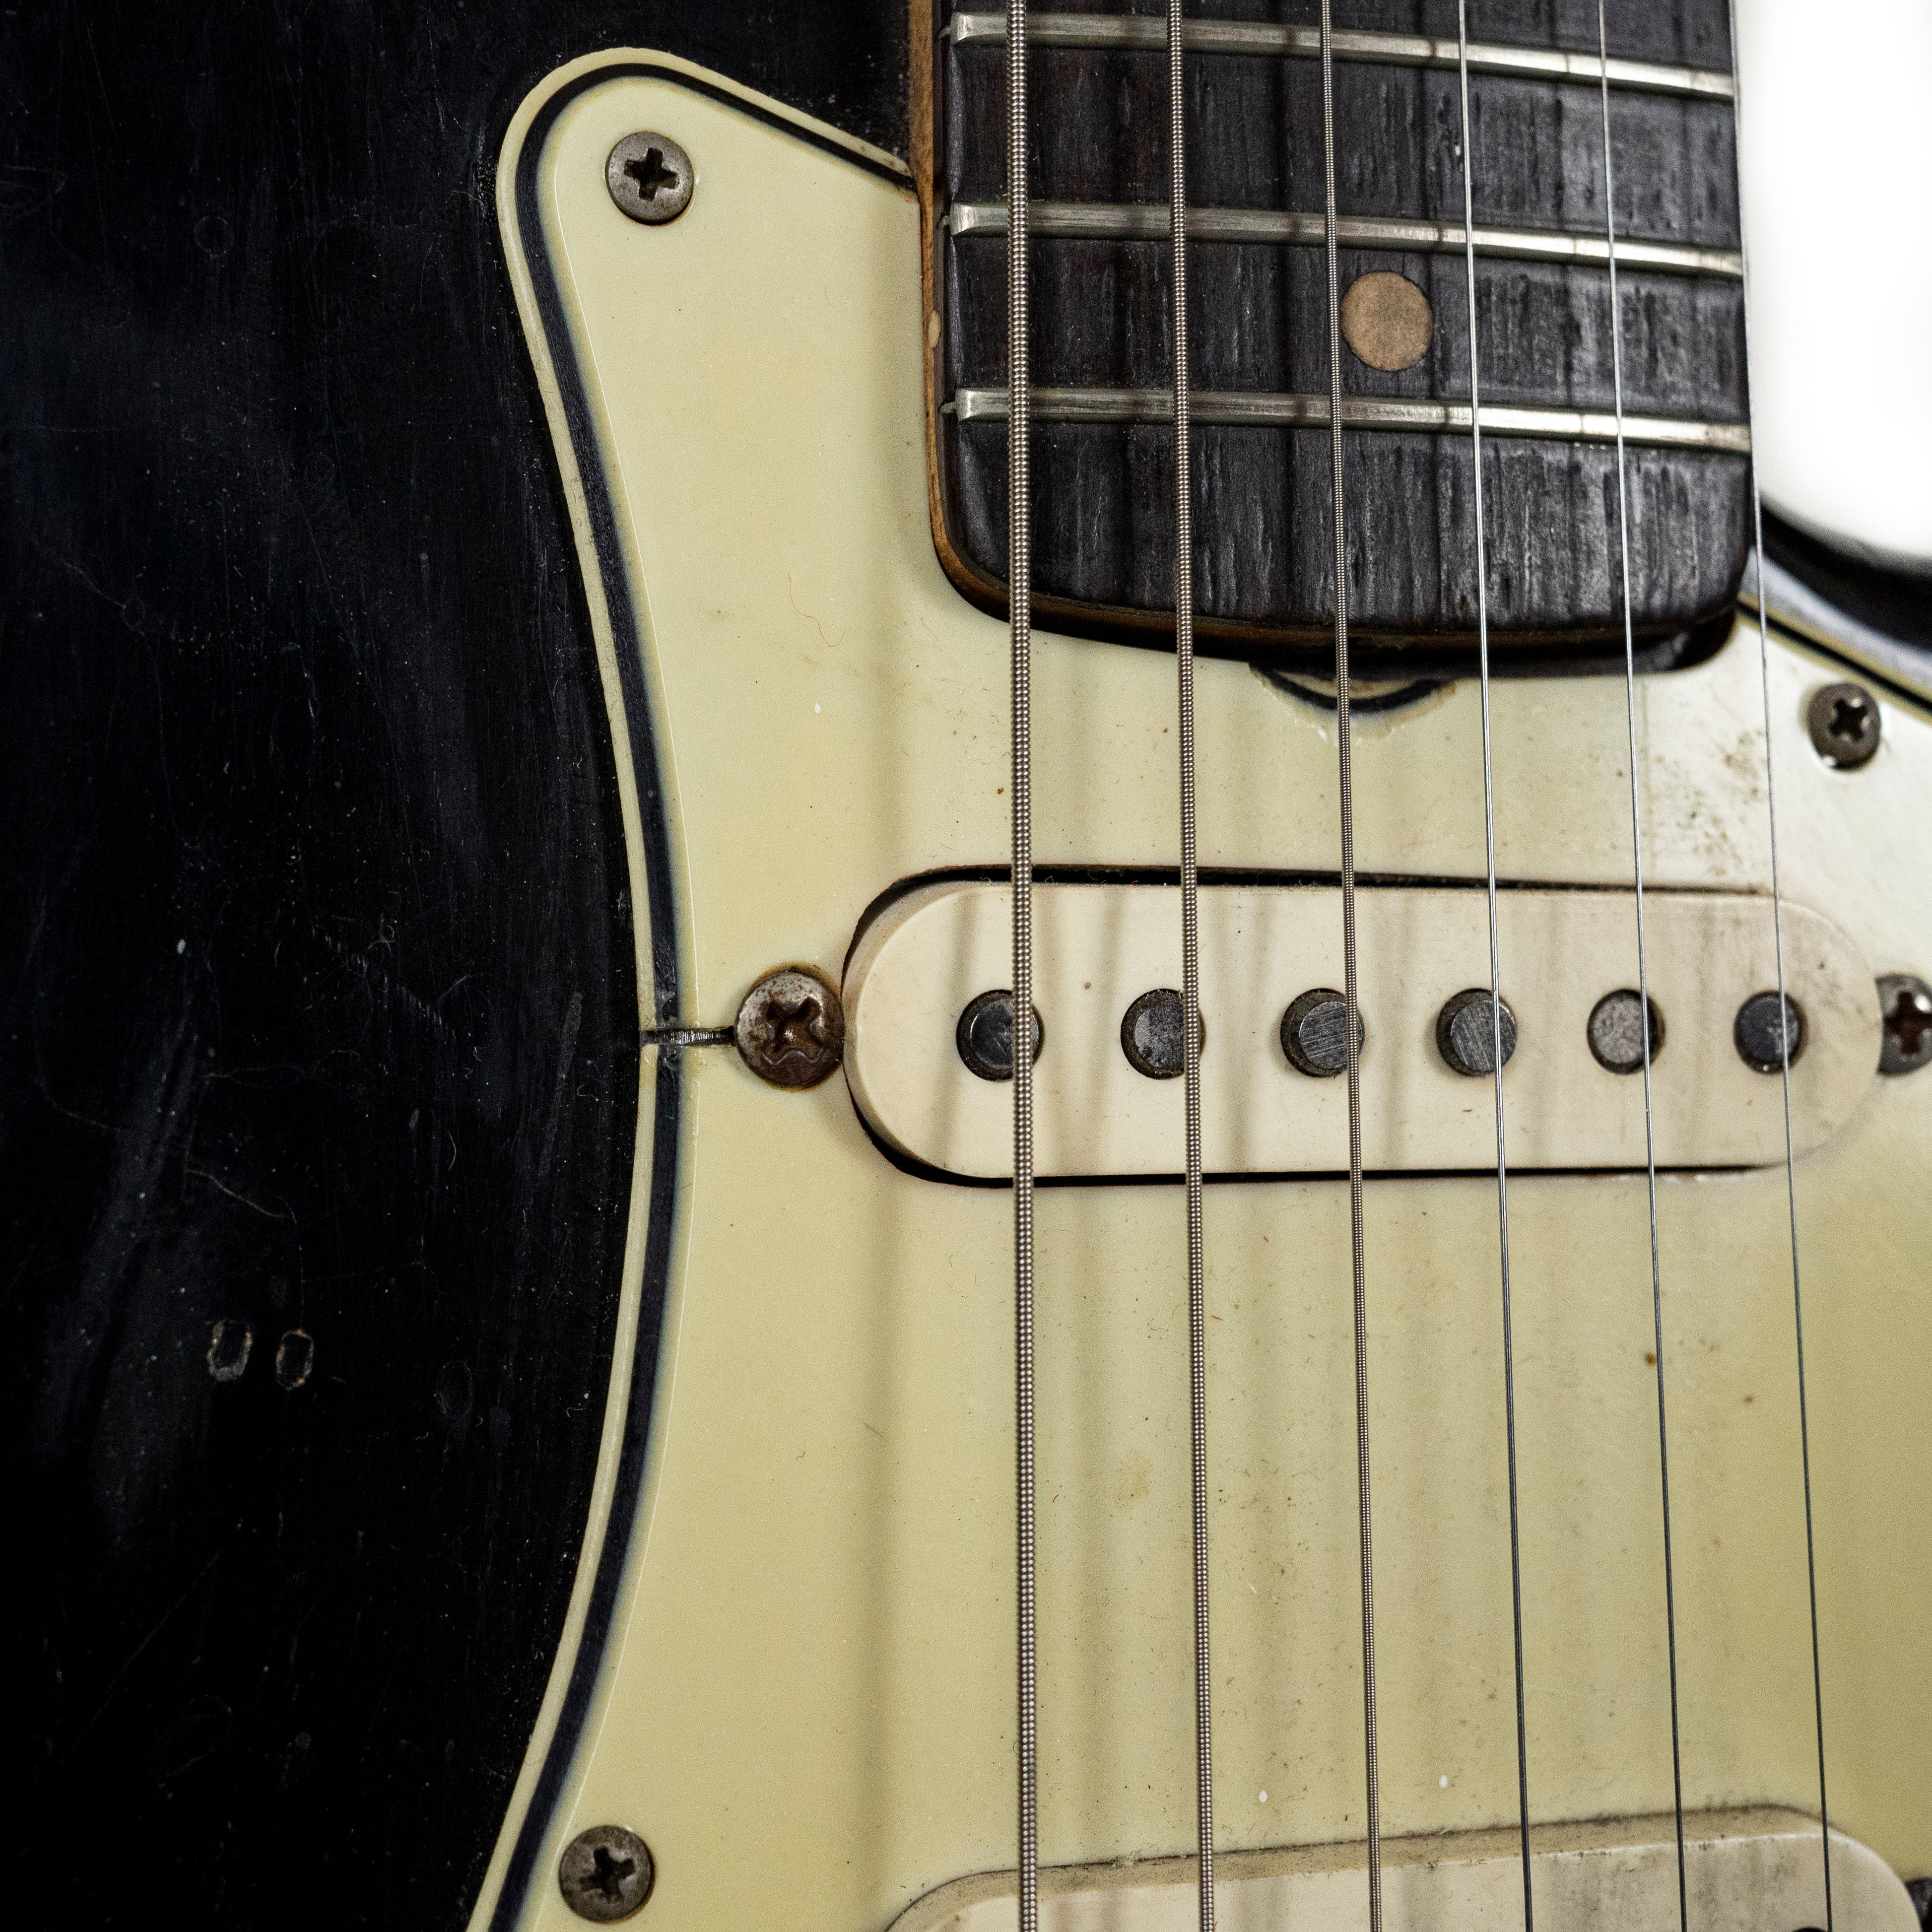 Fender 1963 Stratocaster Black, Owned by Mike Bloomfield